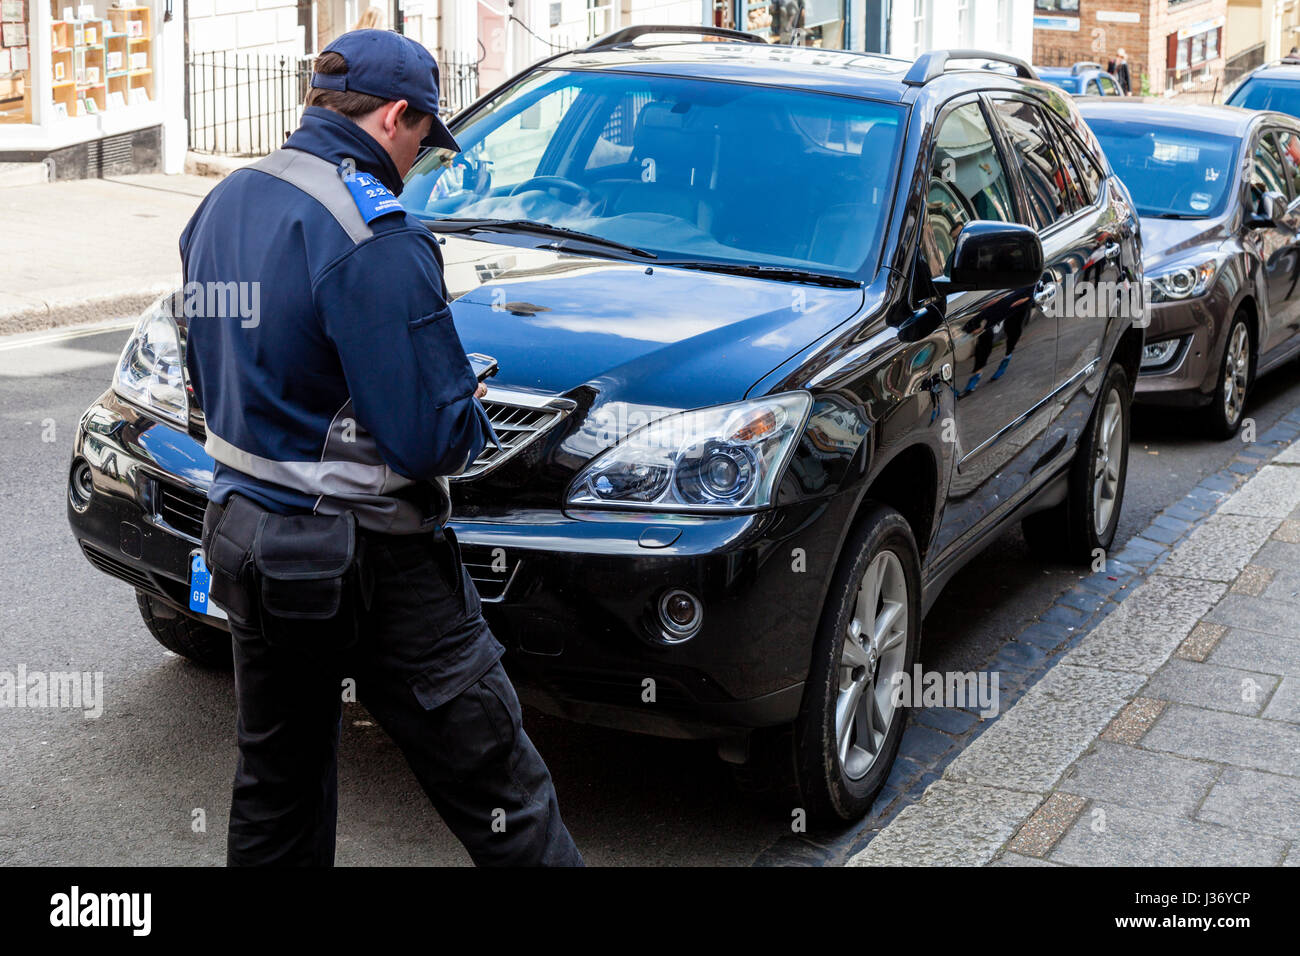 A Traffic Warden Taking Car Details, High Street, Lewes, Sussex, UK Stock Photo